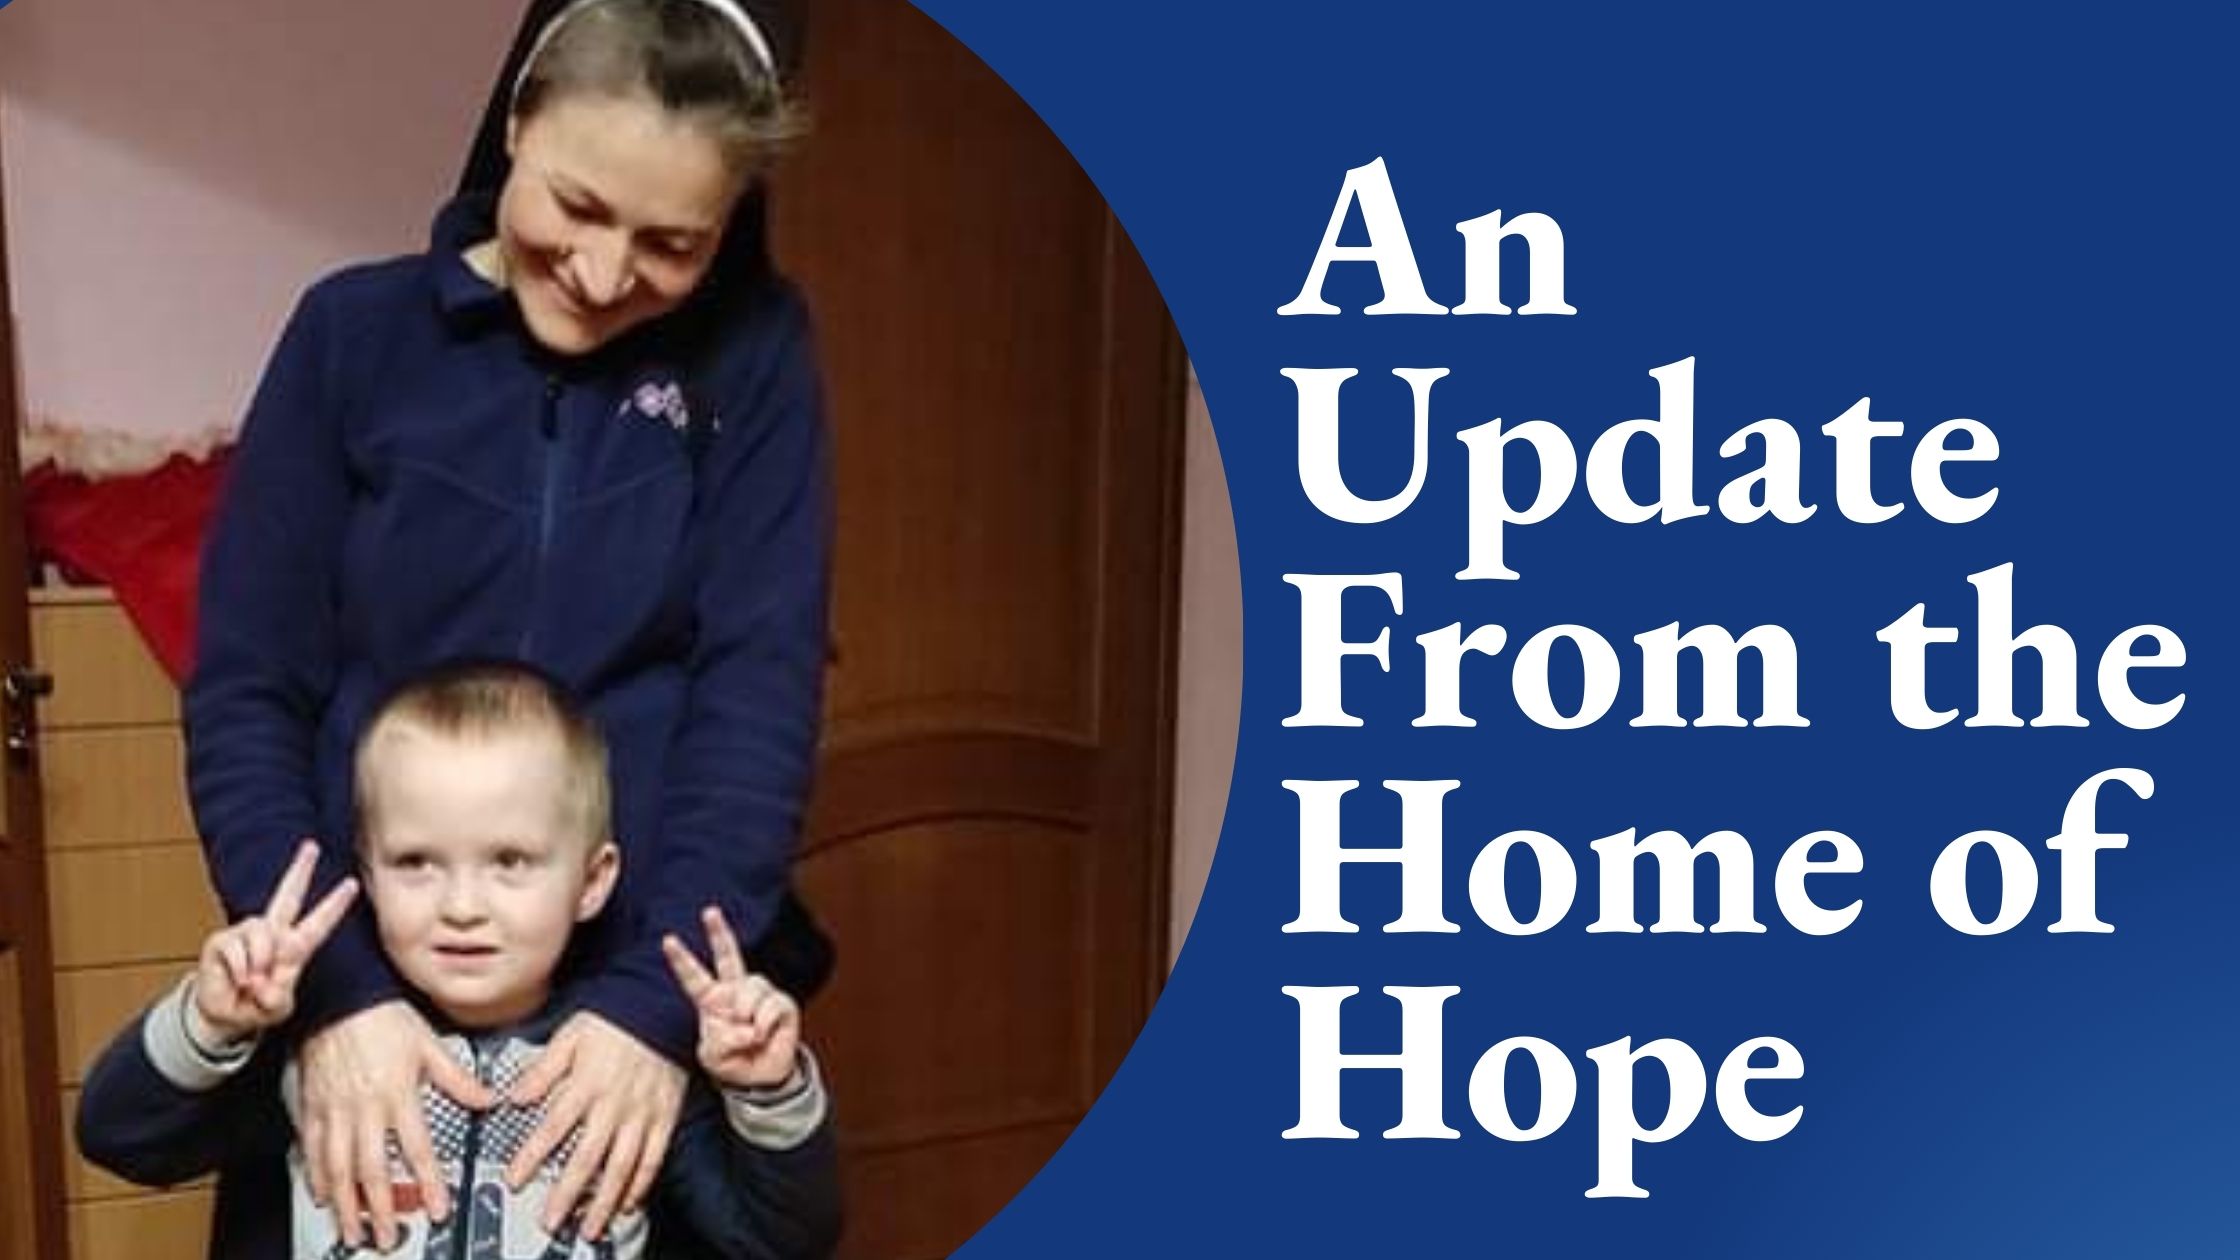 Home of Hope